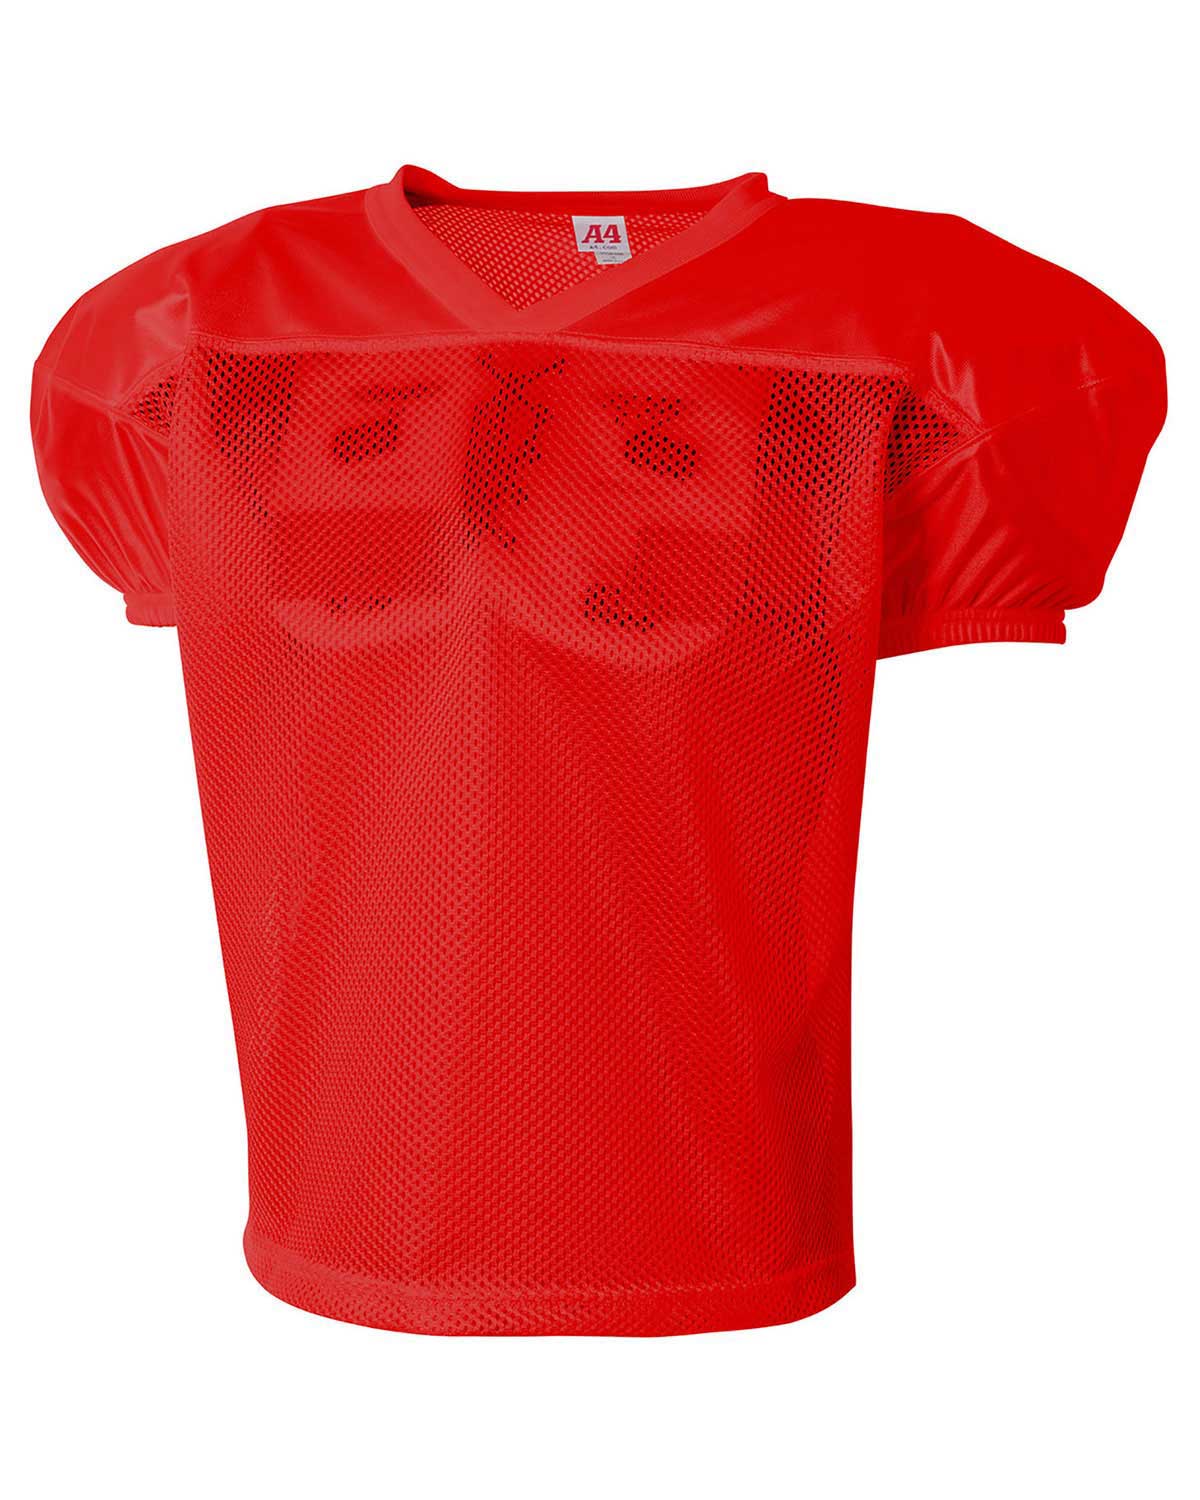 Youth Drills Polyester Mesh Practice Jersey